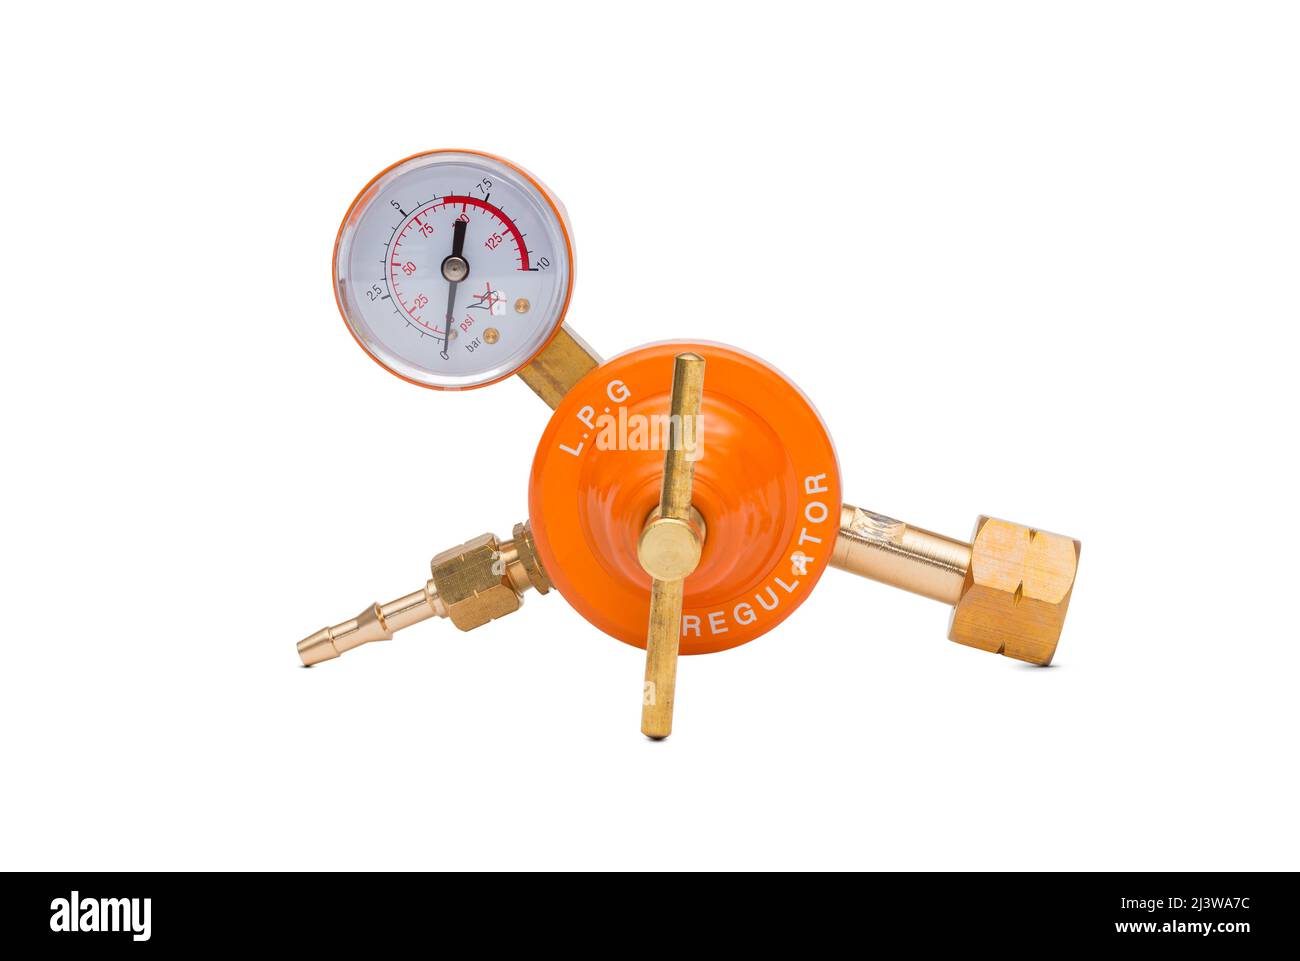 LGP Gas regulator isolated on a white background Stock Photo